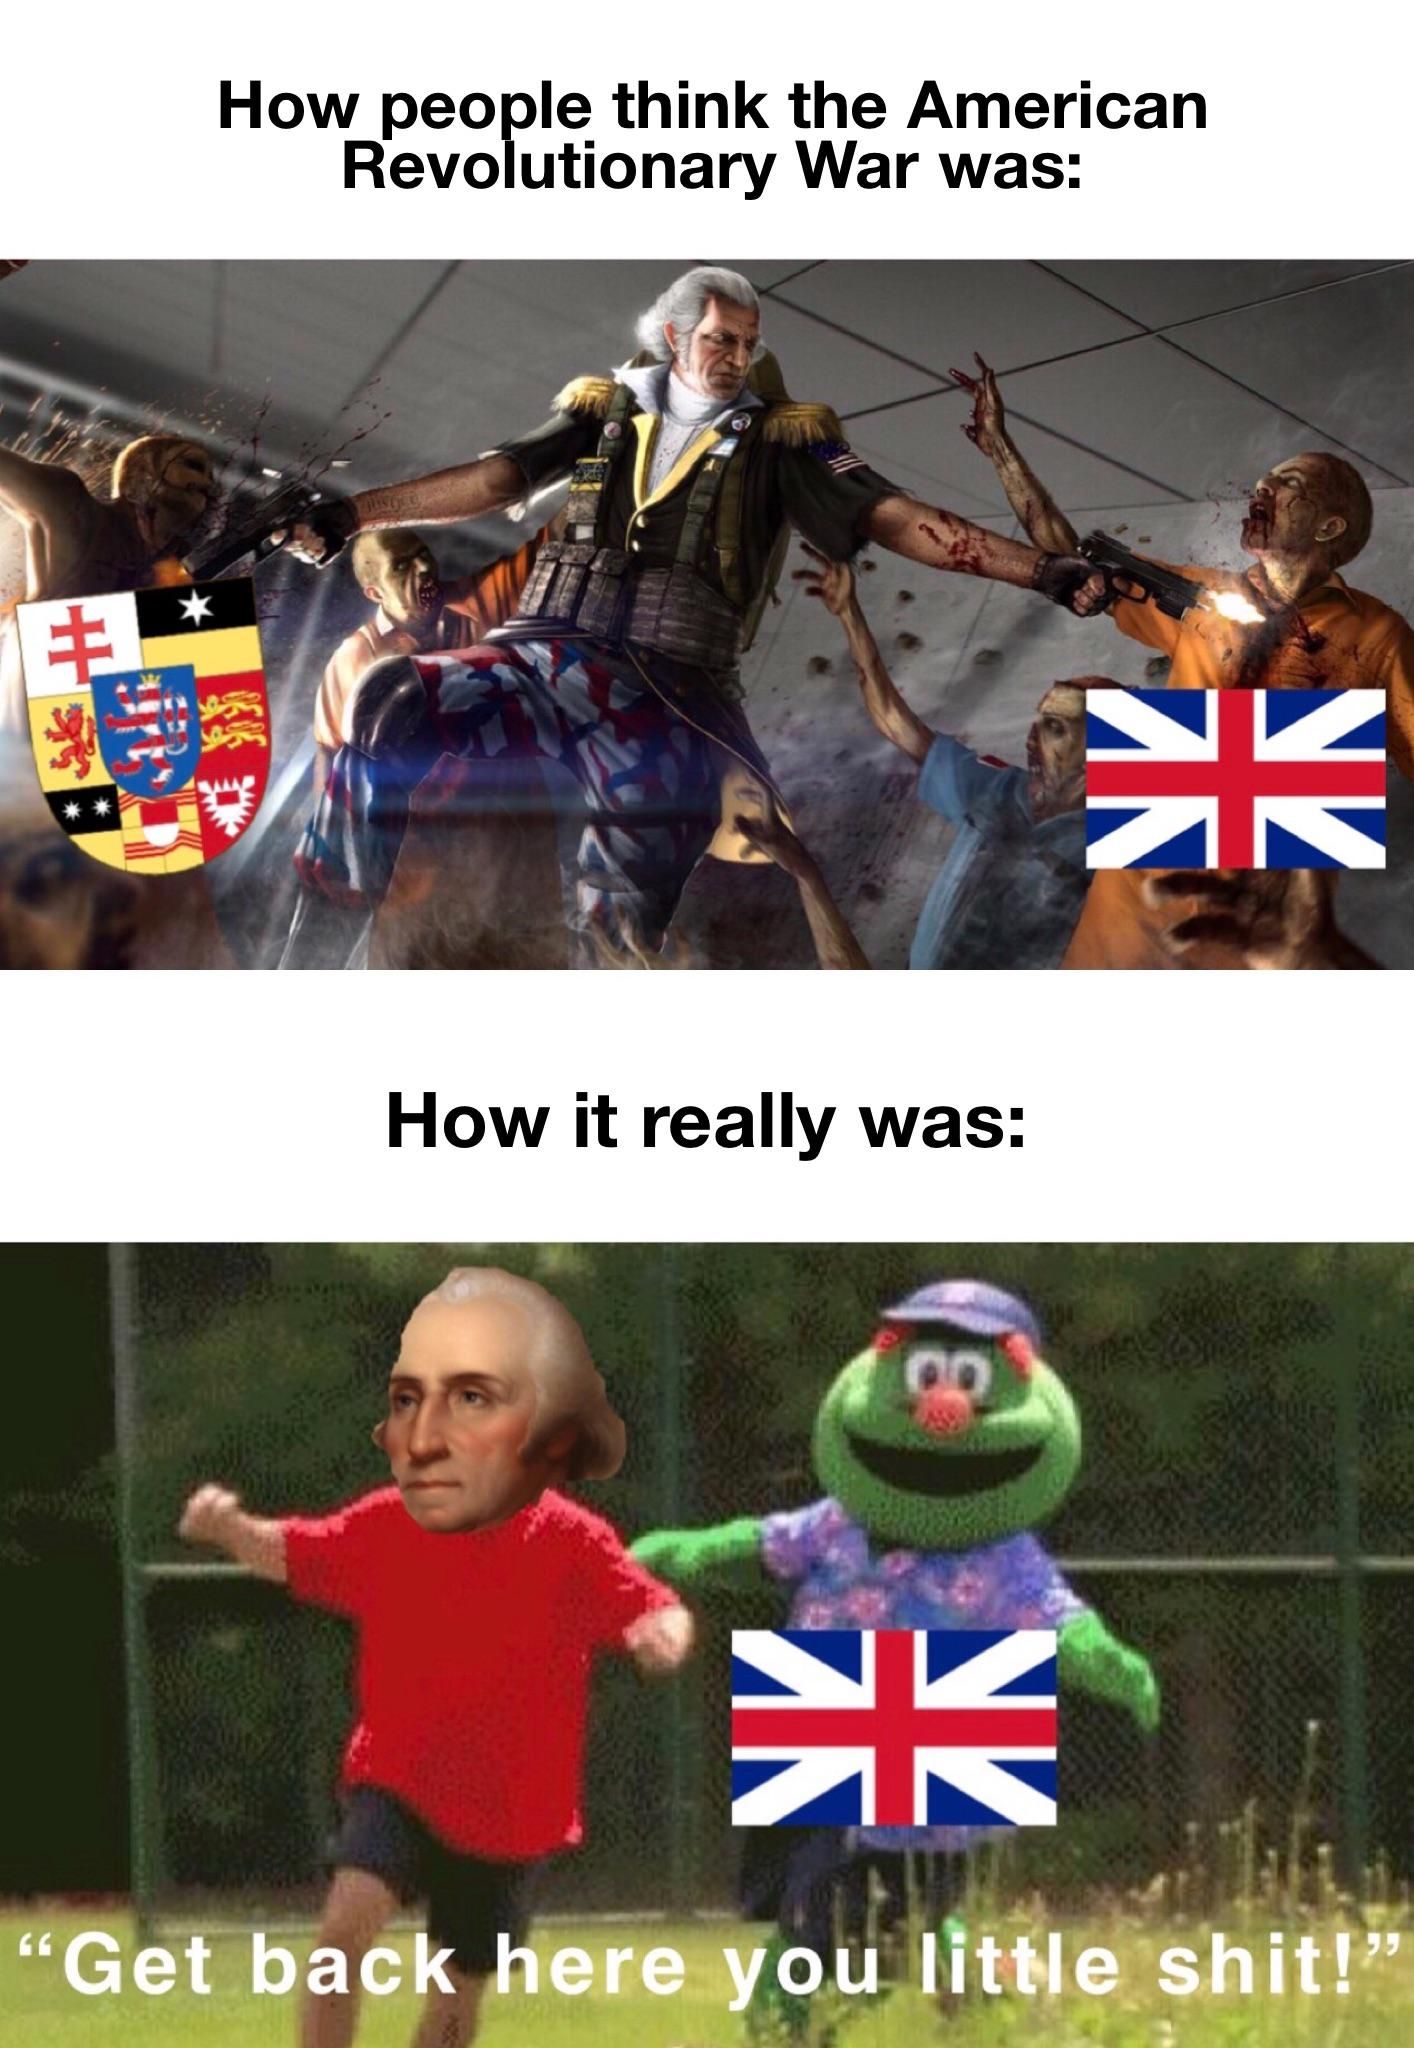 We just annoyed the British into giving up